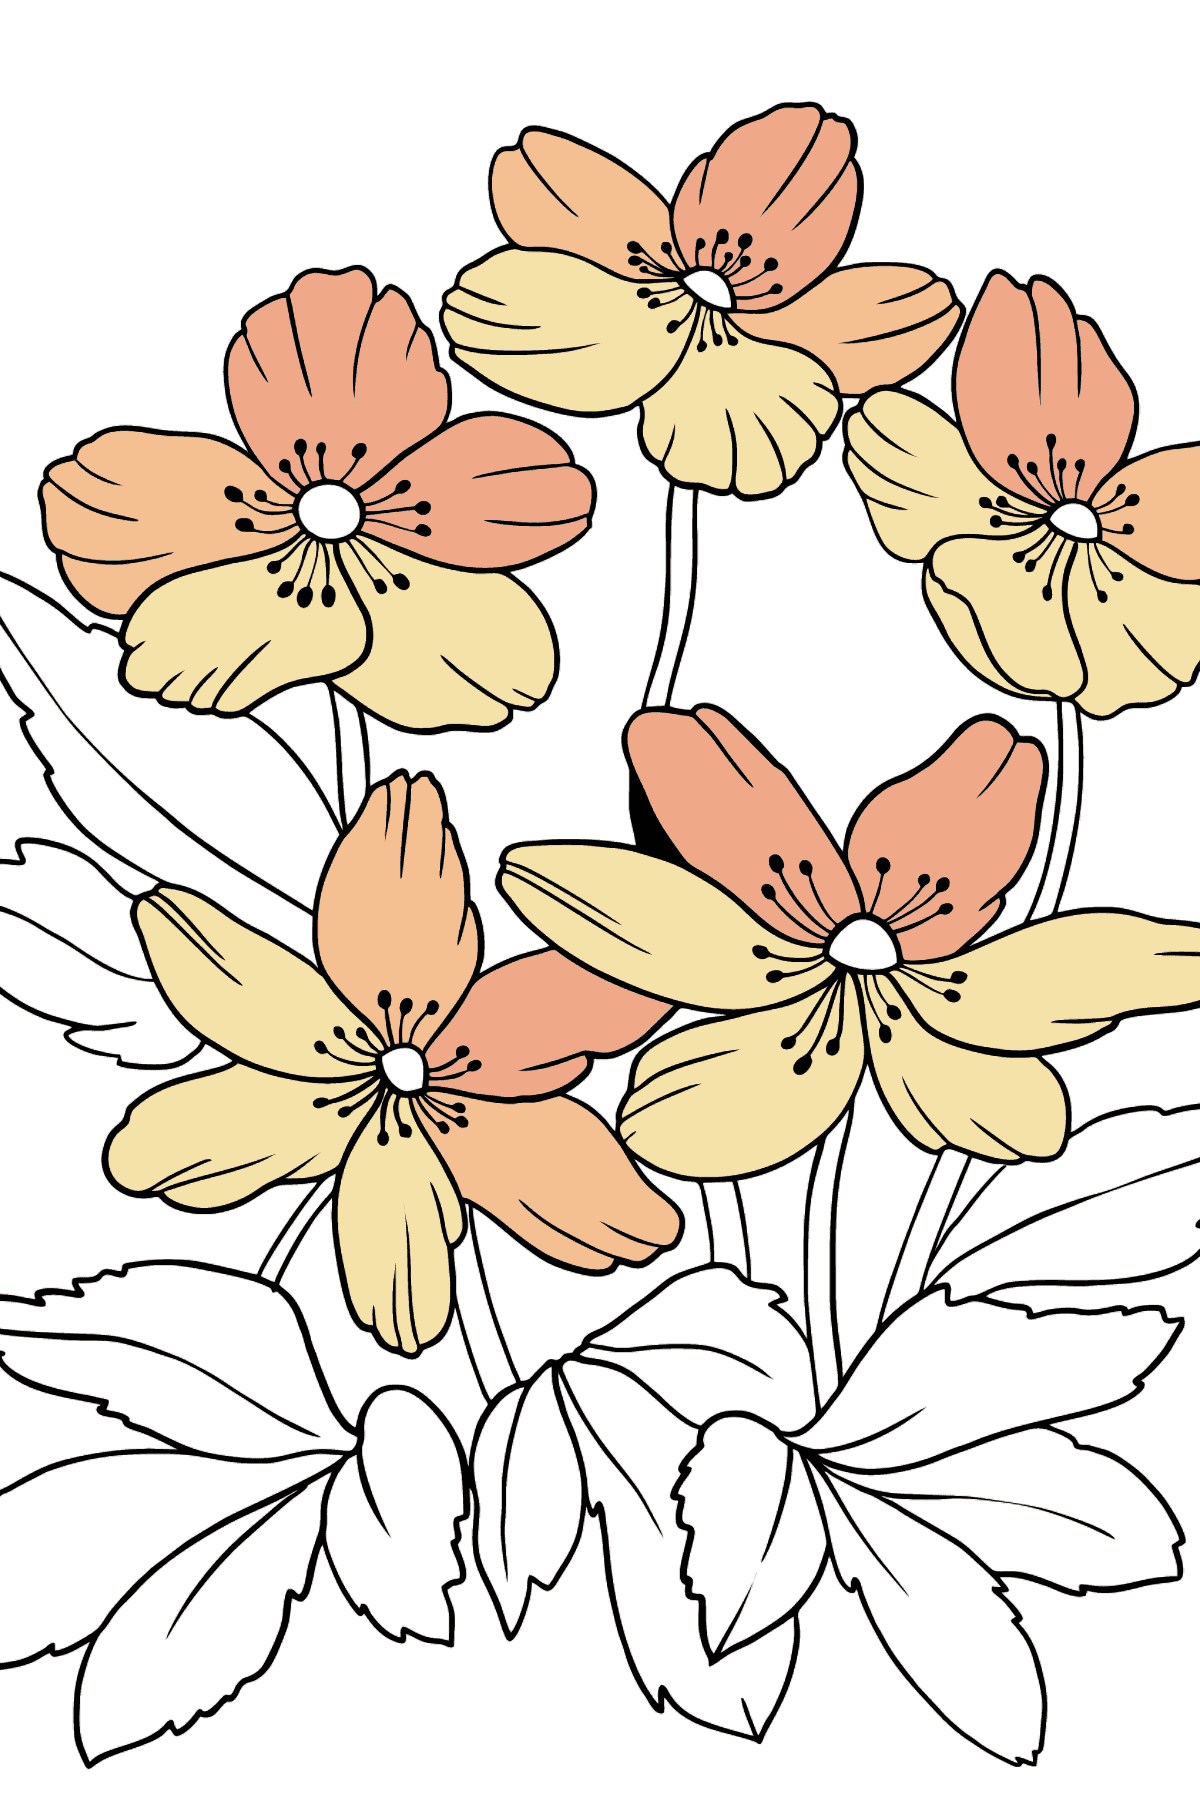 Flower Coloring Page - A Pastel Yellow Windflower - Coloring Pages for Kids